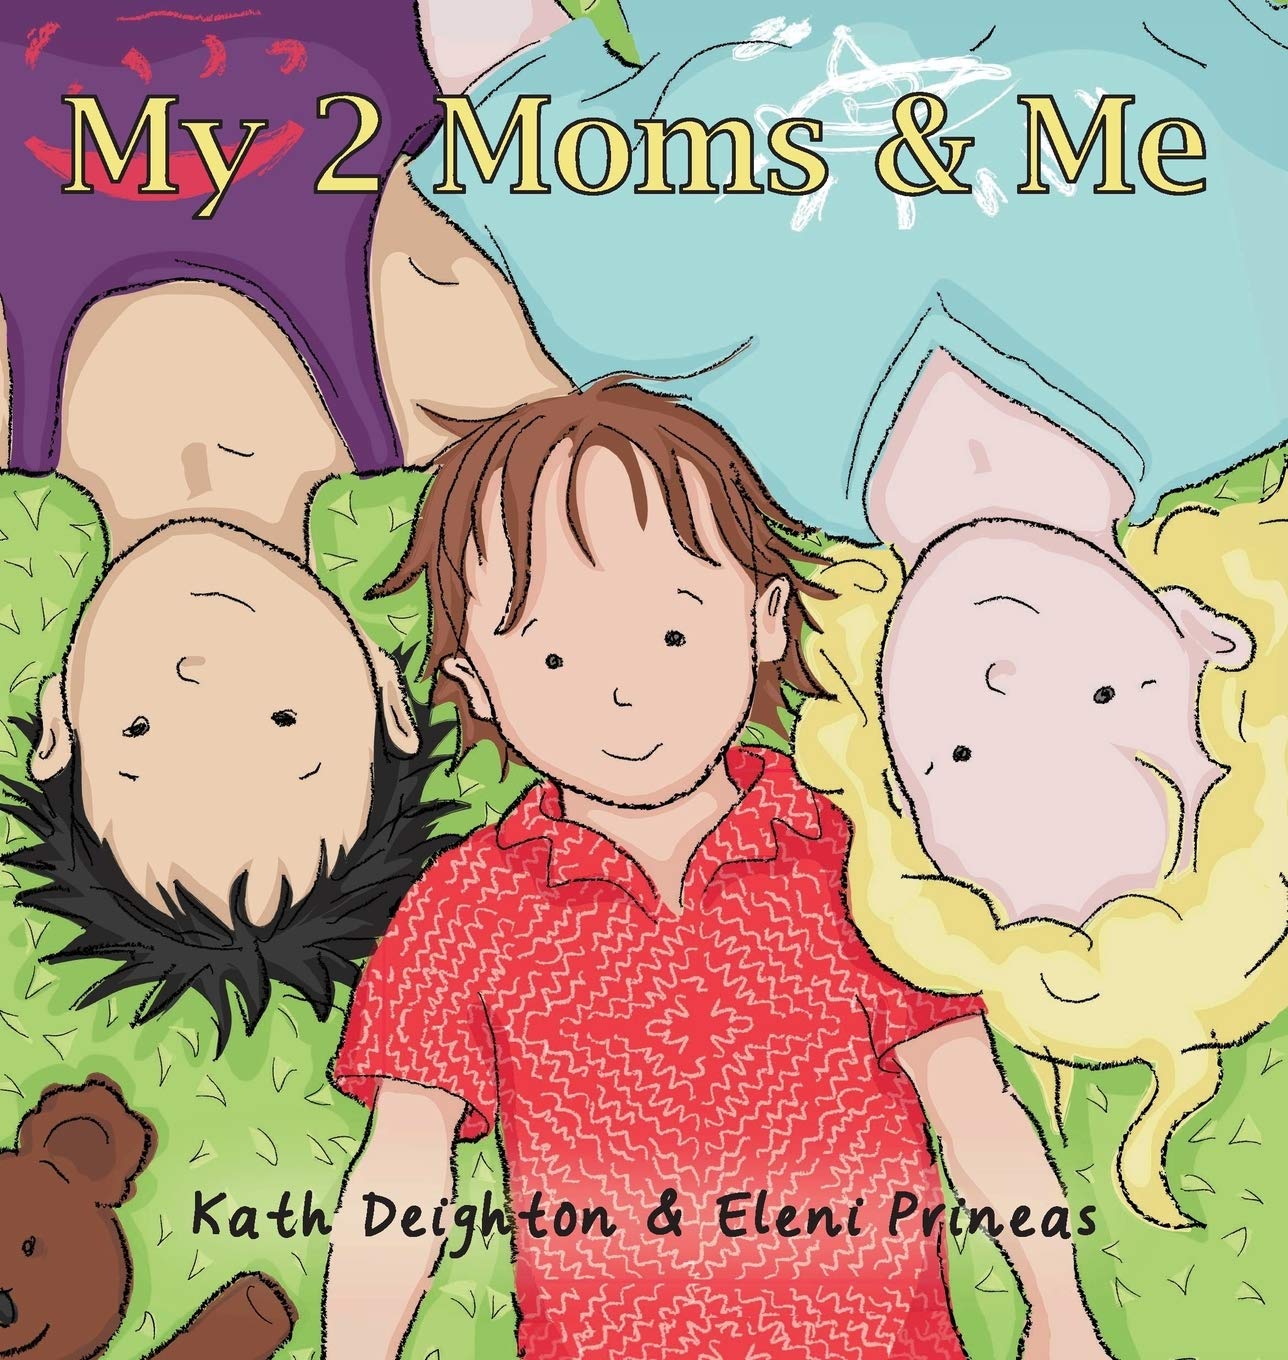 Buy My 2 Moms & Me (And Me) Book Online at Low Prices in India | My 2 Moms  & Me (And Me) Reviews & Ratings - Amazon.in